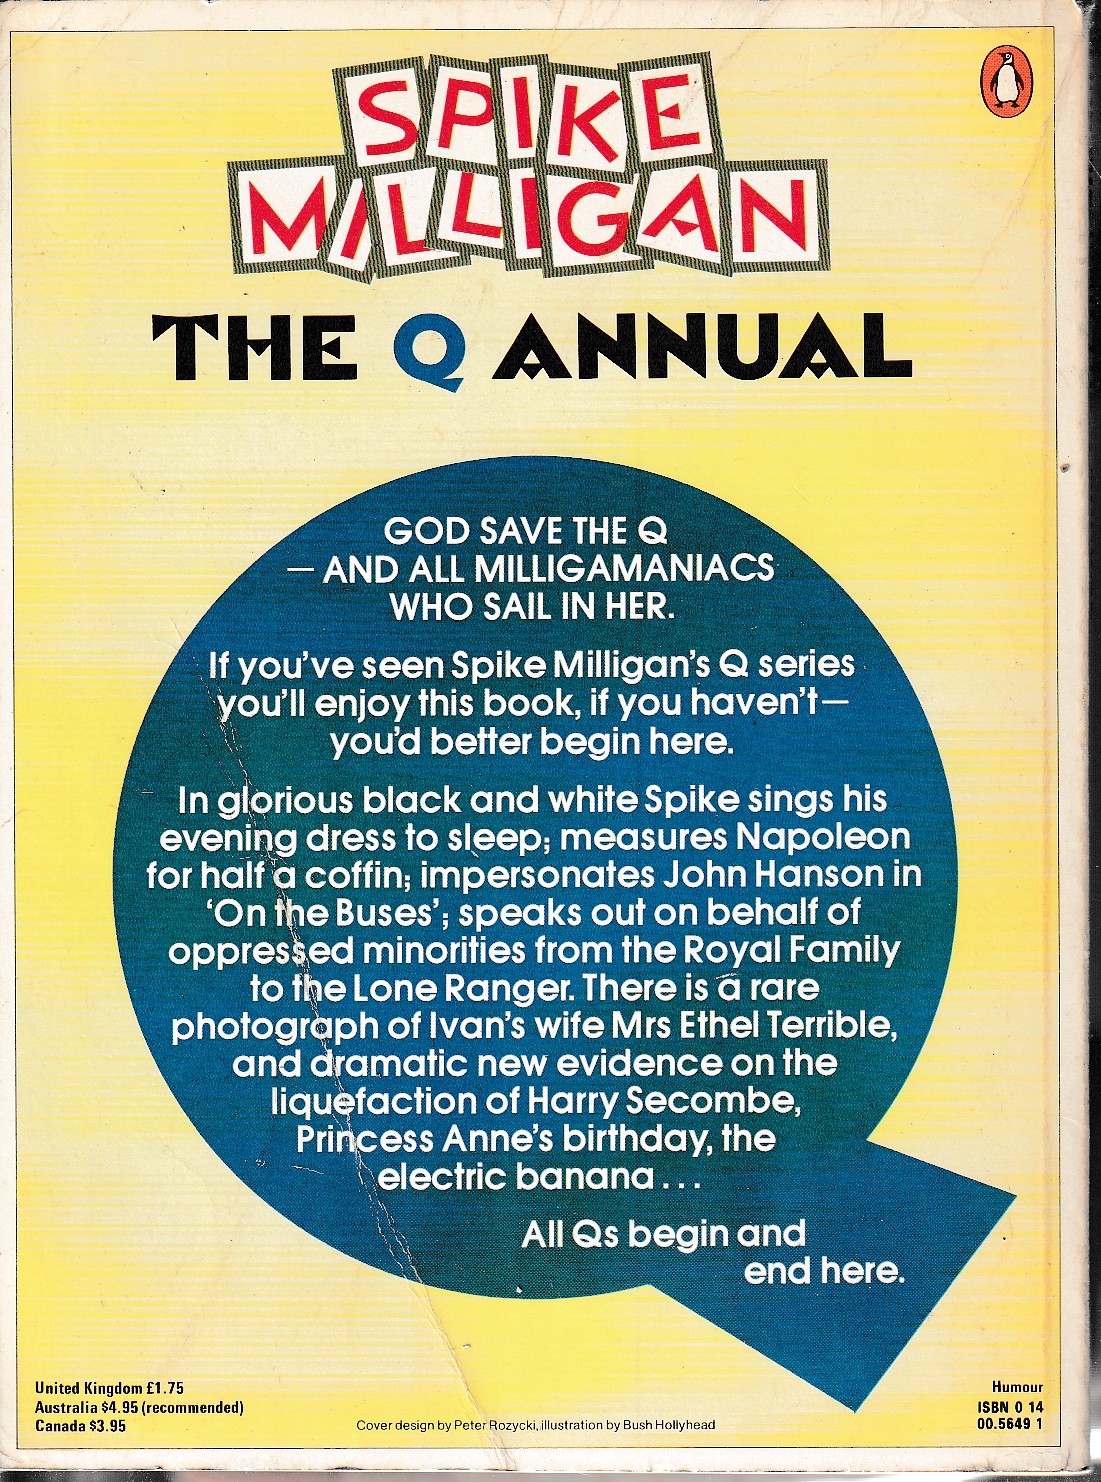 Spike Milligan  THE Q ANNUAL magnified rear book cover image